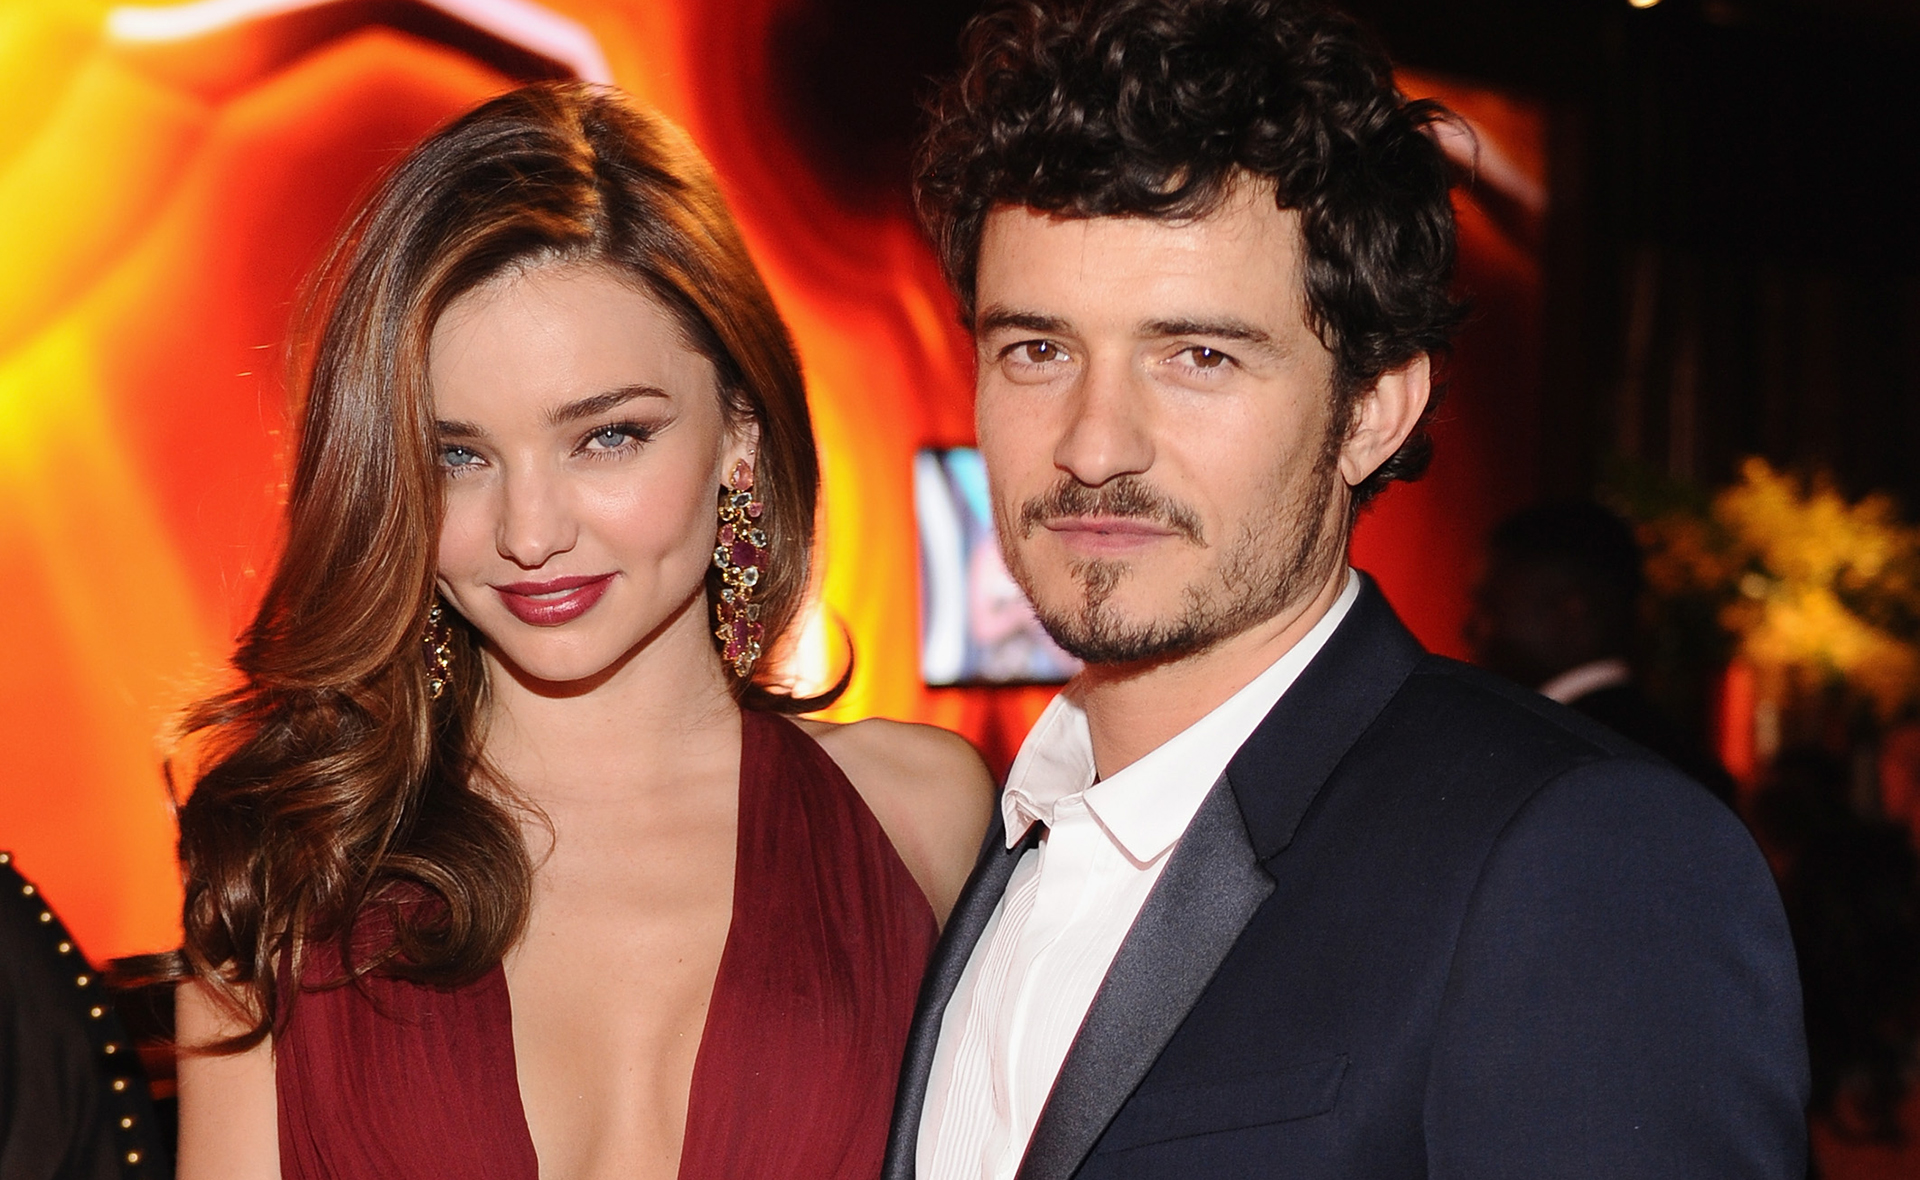 EXCLUSIVE: The truth behind Miranda Kerr’s latest comments about Orlando Bloom revealed years after their split